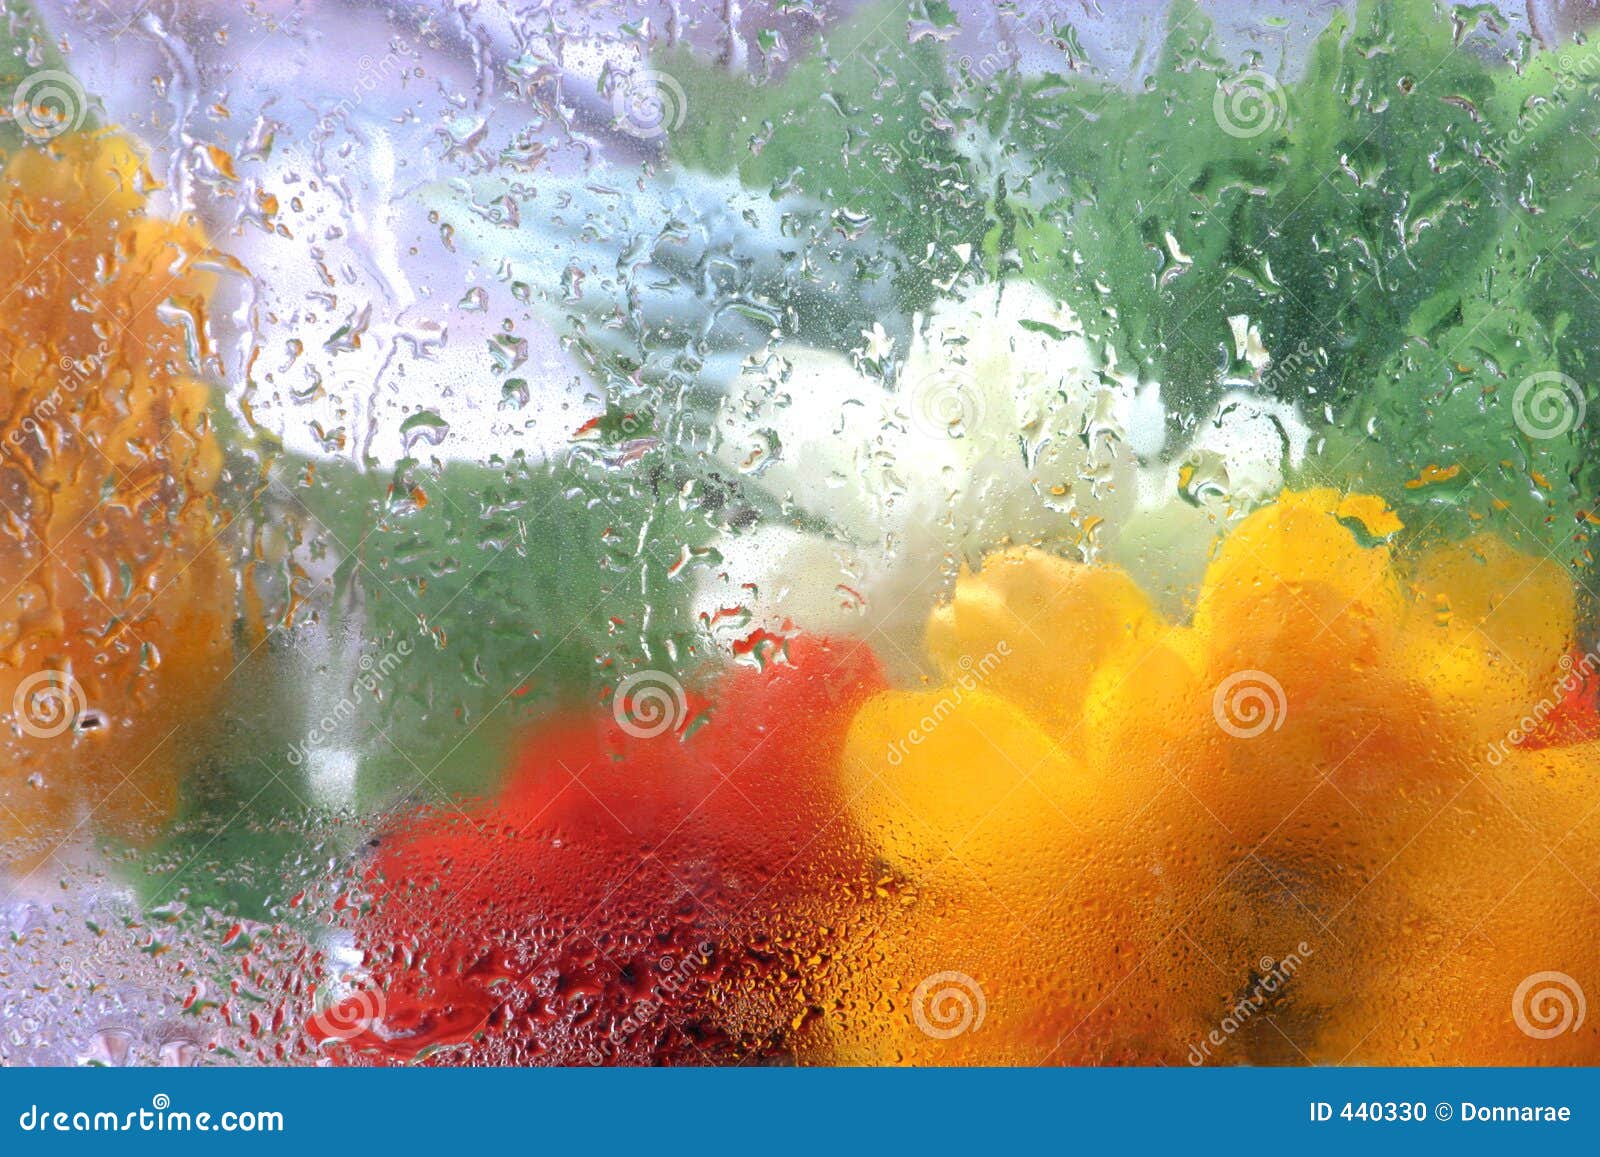 colorful abstract impressions. uplifiting floral rainy textures.